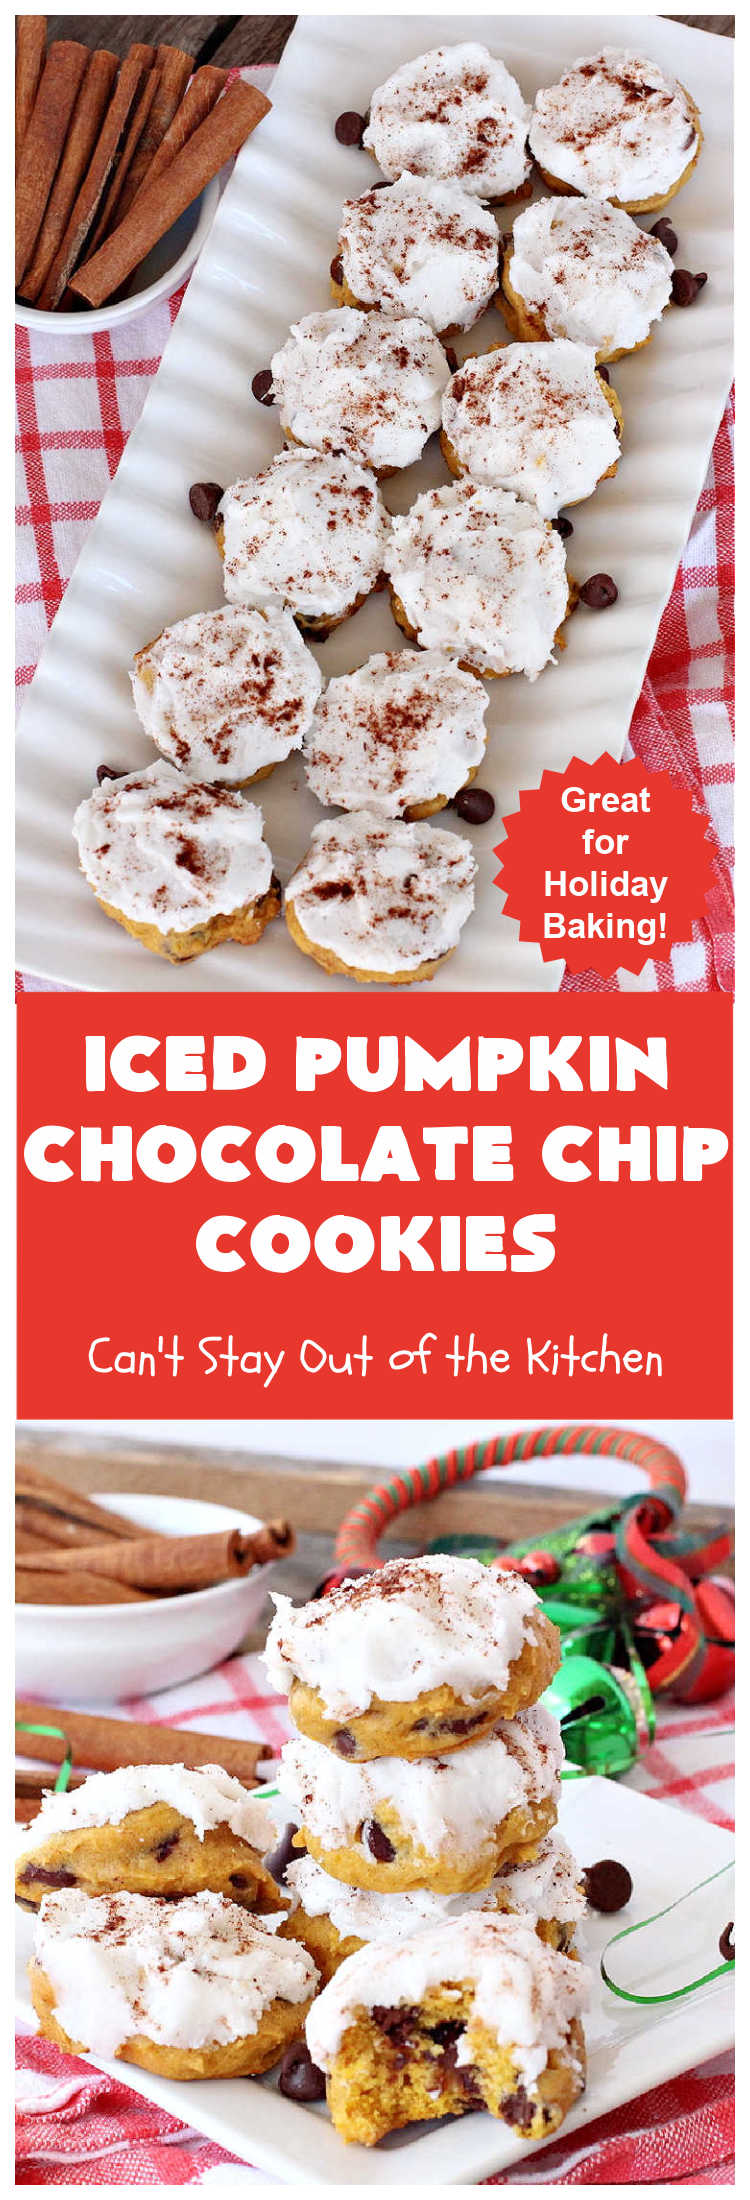 Iced Pumpkin Chocolate Chip Cookies | Can't Stay Out of the Kitchen | these spectacular #cookies have it all! #ChocolateChips, #pumpkin & icing. They're perfect for #holiday #baking & #Christmas parties or a #ChristmasCookieExchange. #dessert #PumpkinDessert #ChocolateDessert #chocolate #IcedPumpkinChocolateChipCookies